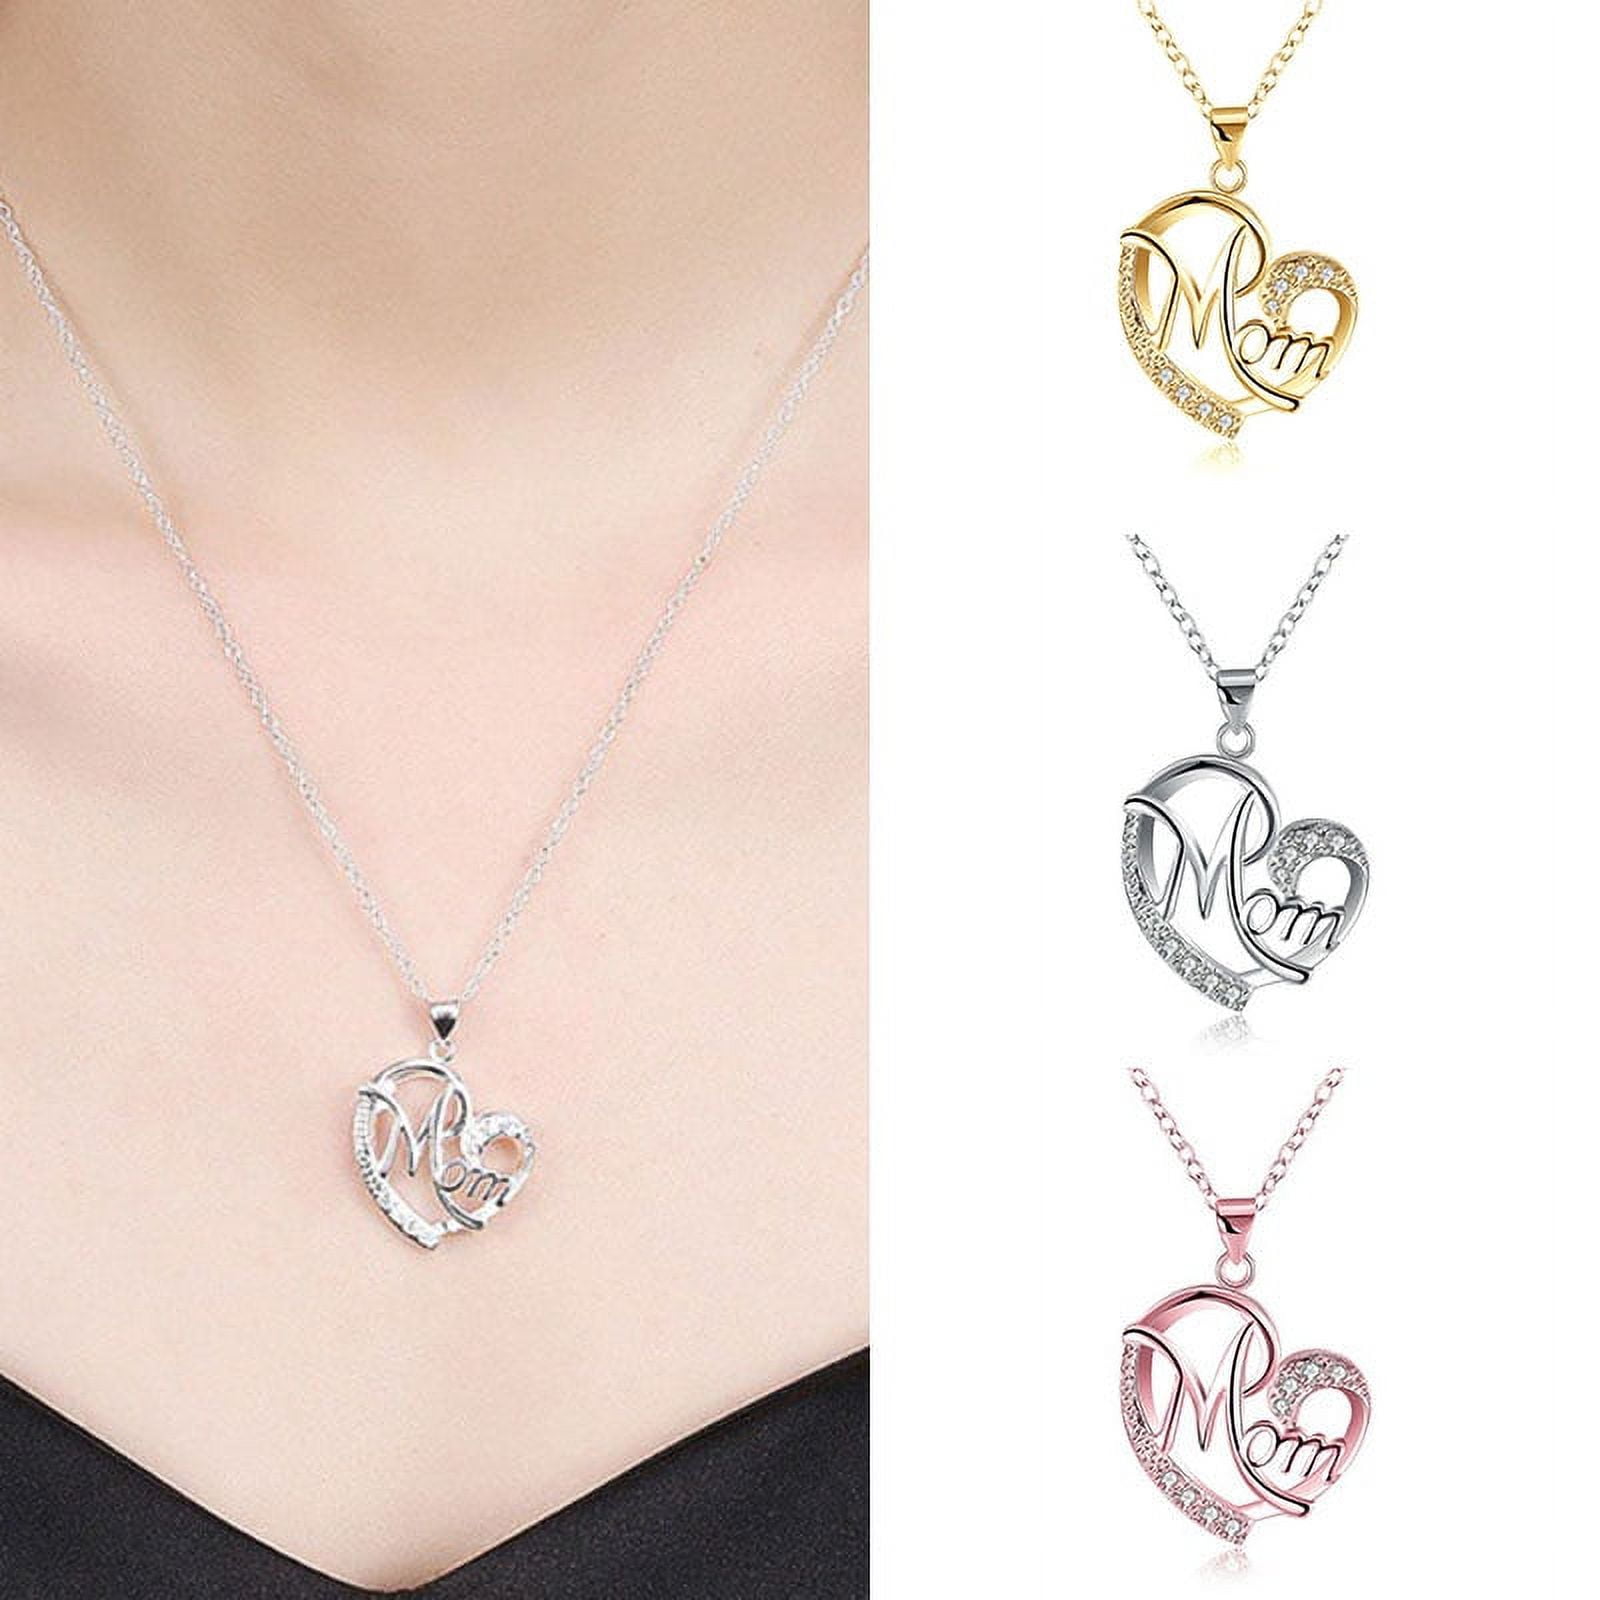 Gifts for Mum Necklace Mum Gifts Birthday Gifts for Mum Silver Necklace Mum  Necklace I Love You Mum Heart Necklace (20inch) : Amazon.co.uk: Fashion